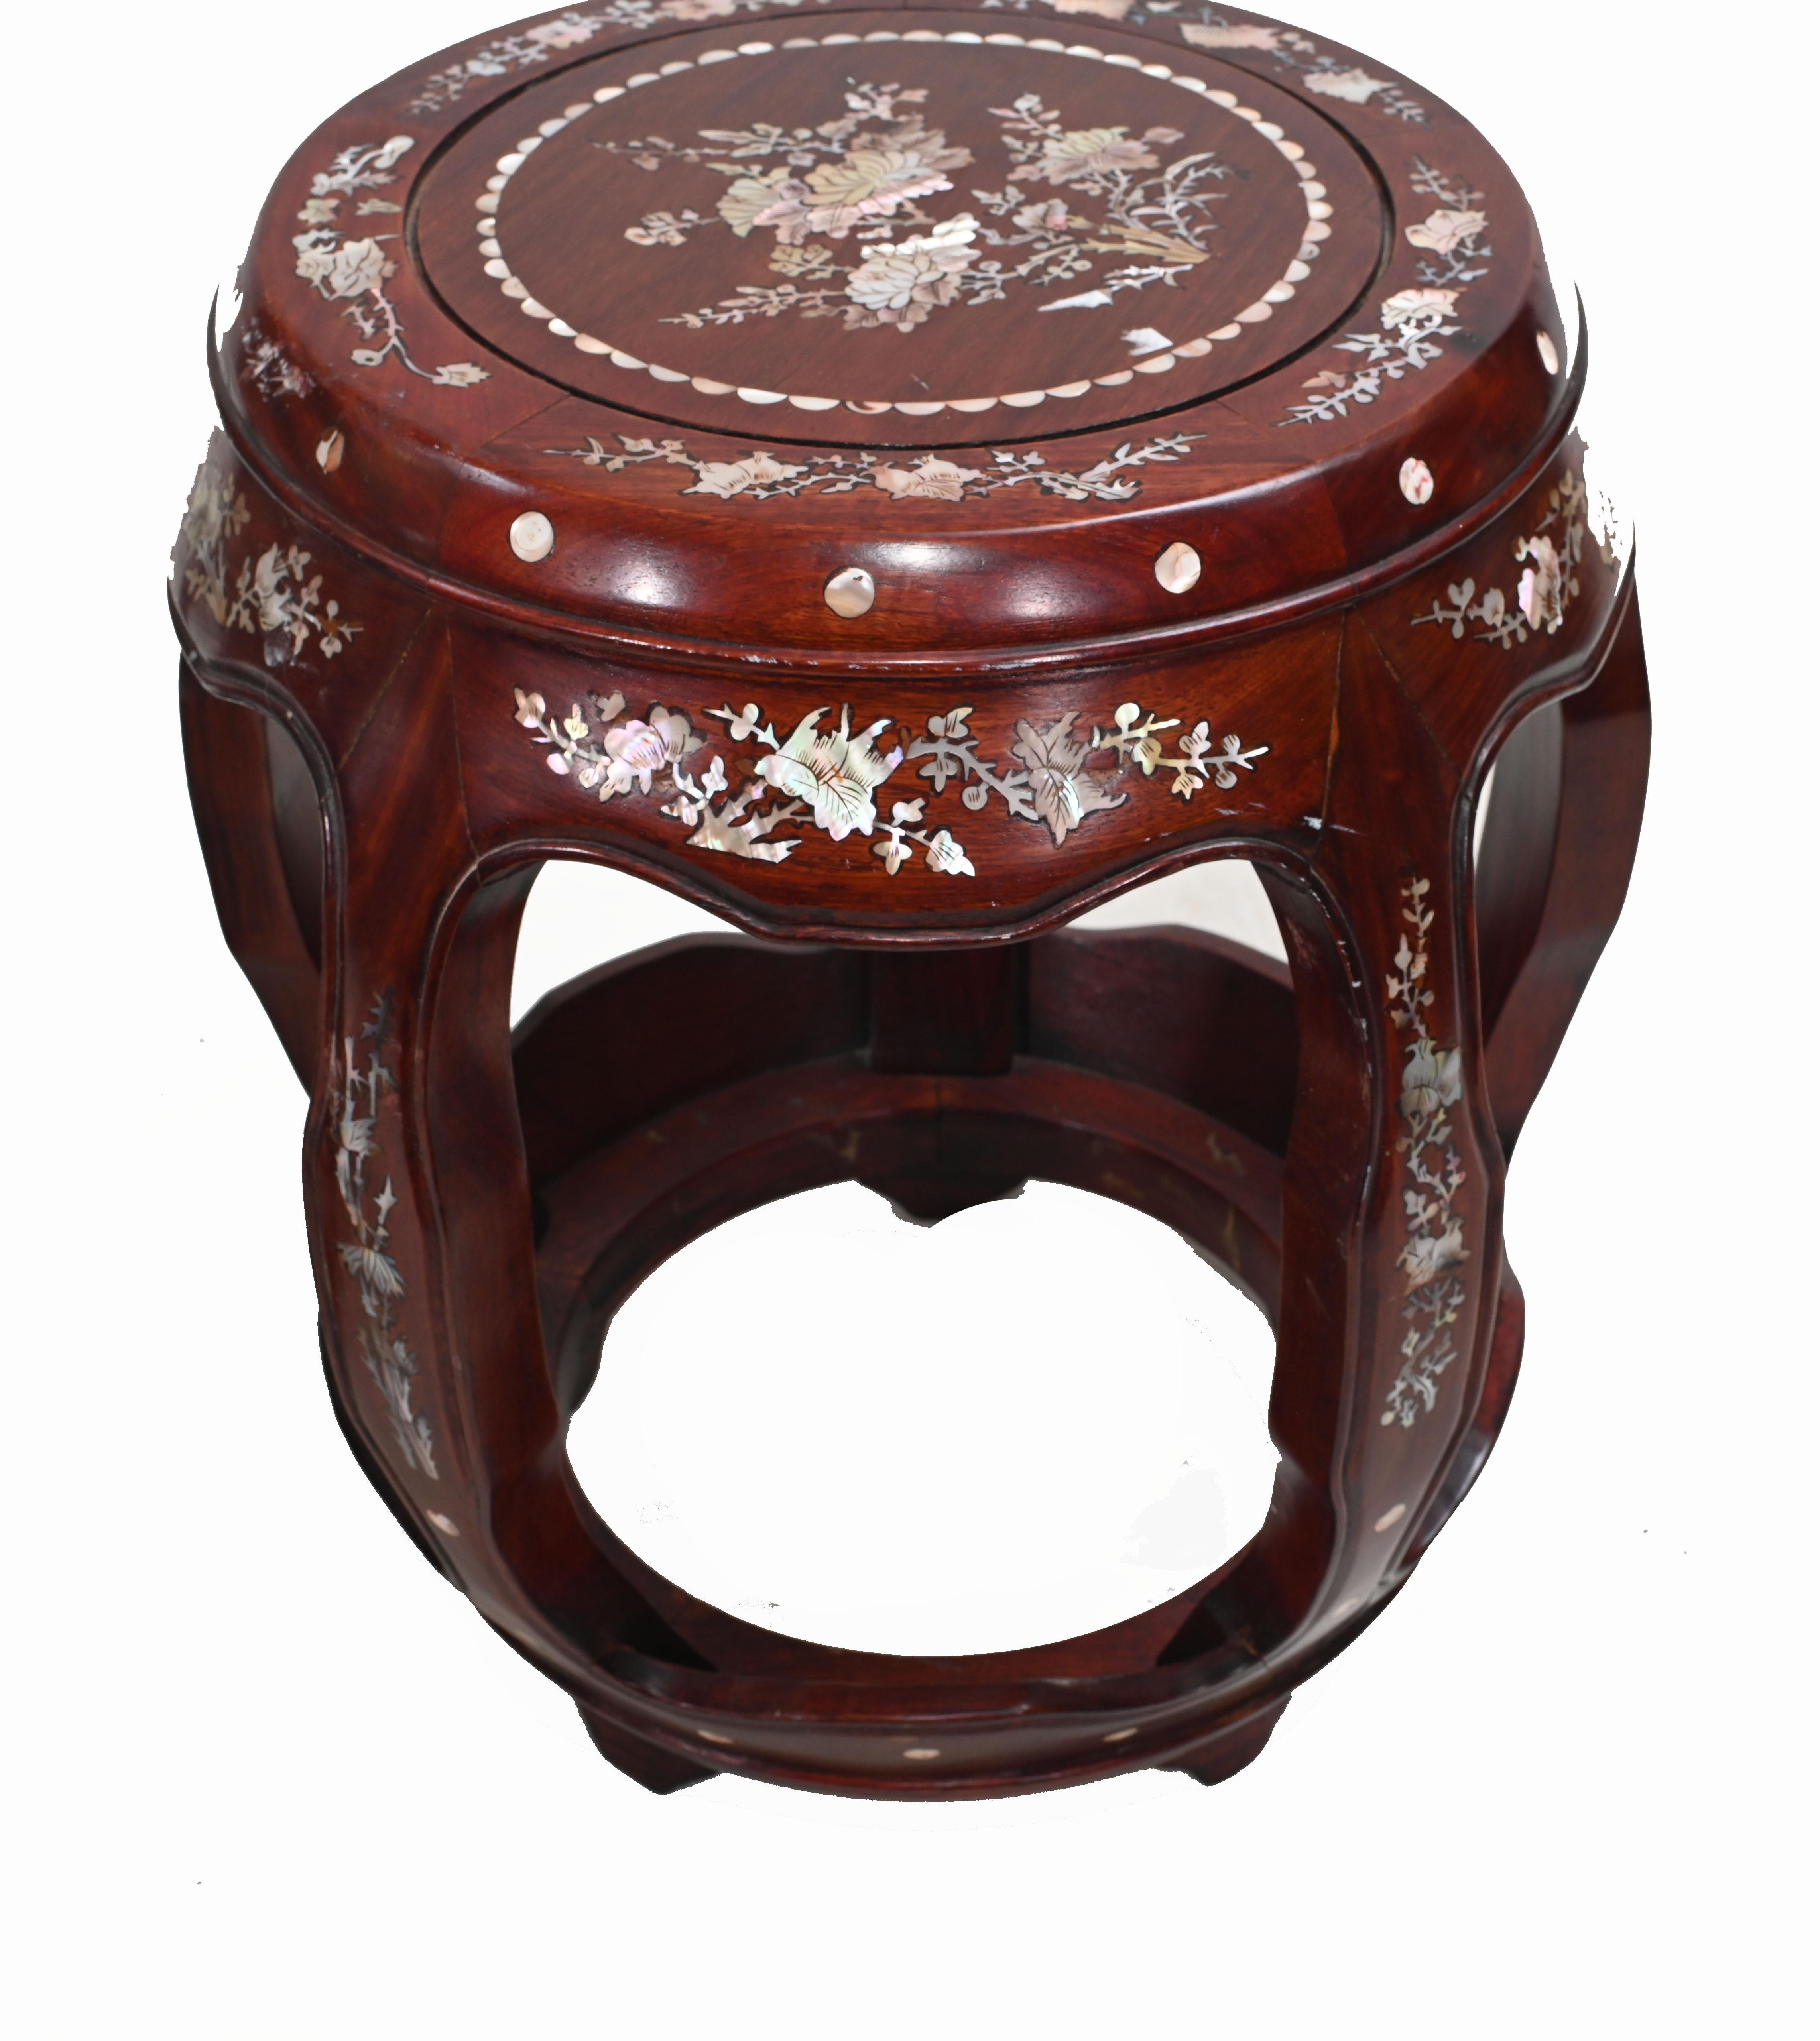 Elegant pair of Chinese pedestal stands in hardwood
Features intricate mother of pearl inlay work 
Great for displaying decorative pieces such as urns or vases
Circa 1930 
Some of our items are in storage so please check ahead of a viewing to